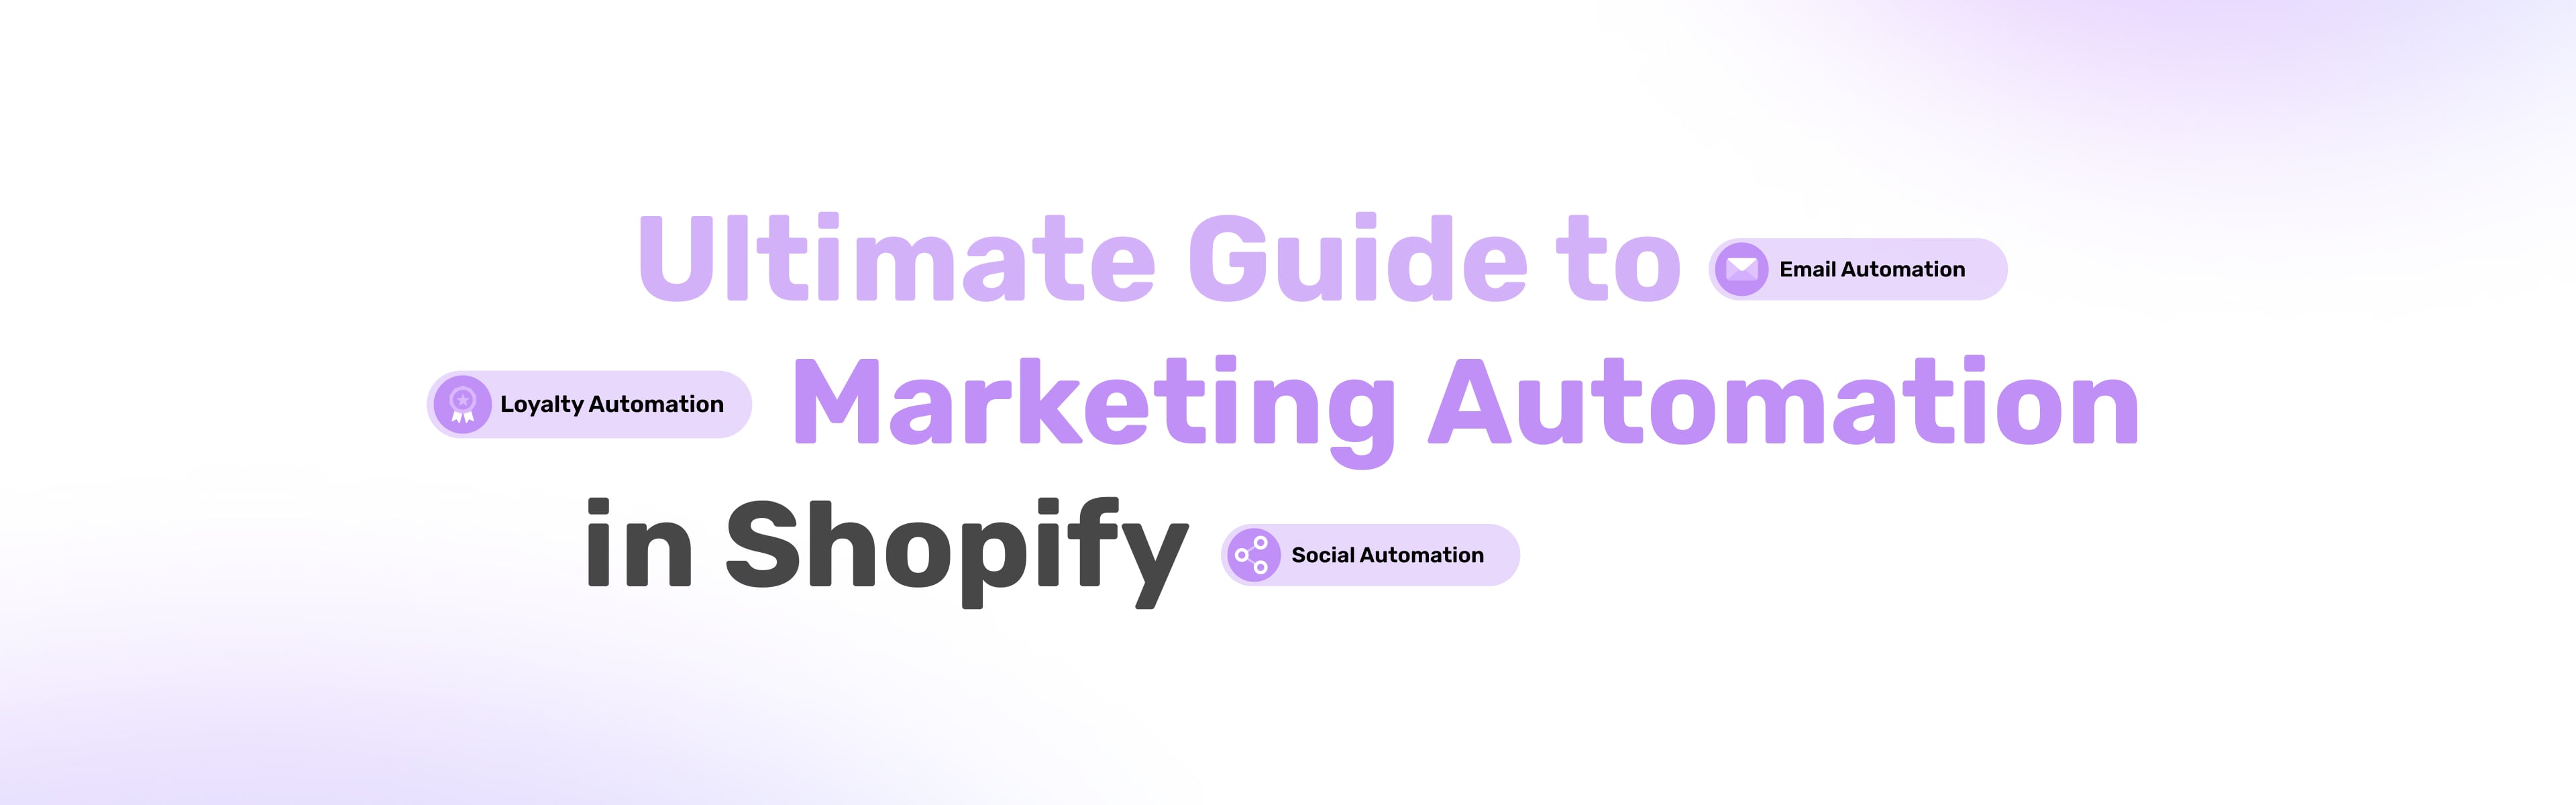 Ultimate Guide to Marketing Automation in Shopify